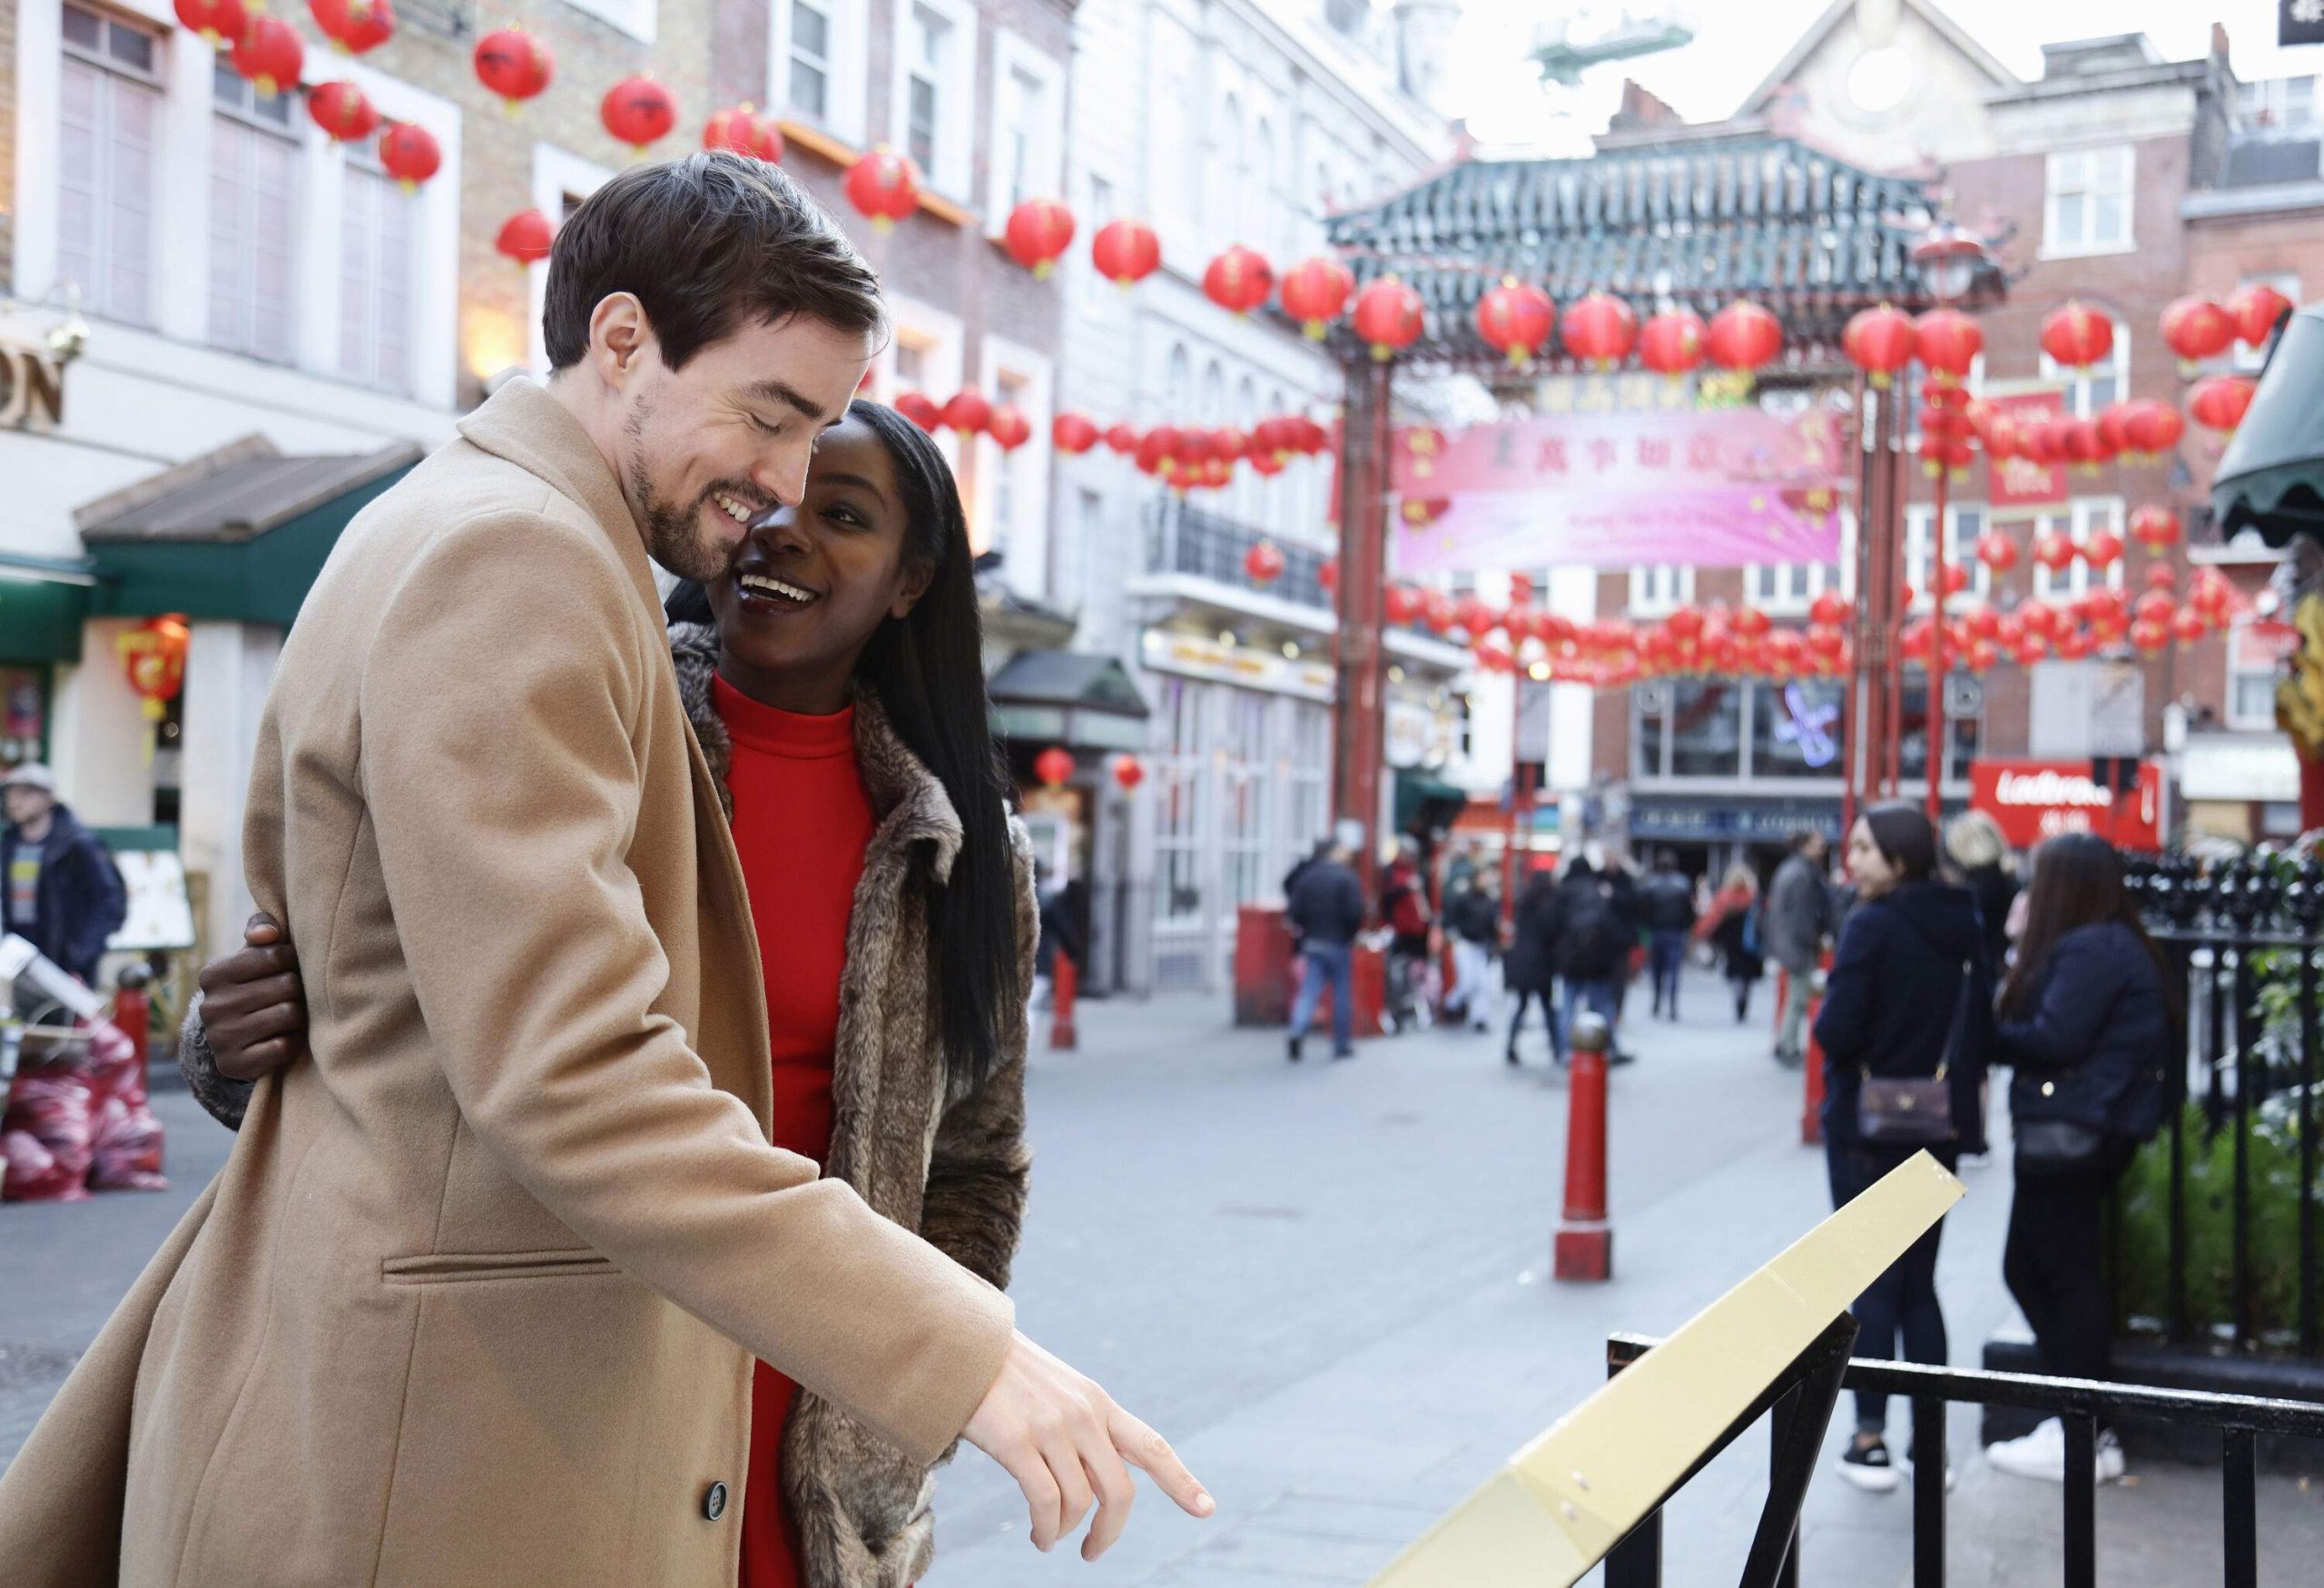 A young couple along a square decorated with red ball lanterns surrounded by tall buildings.